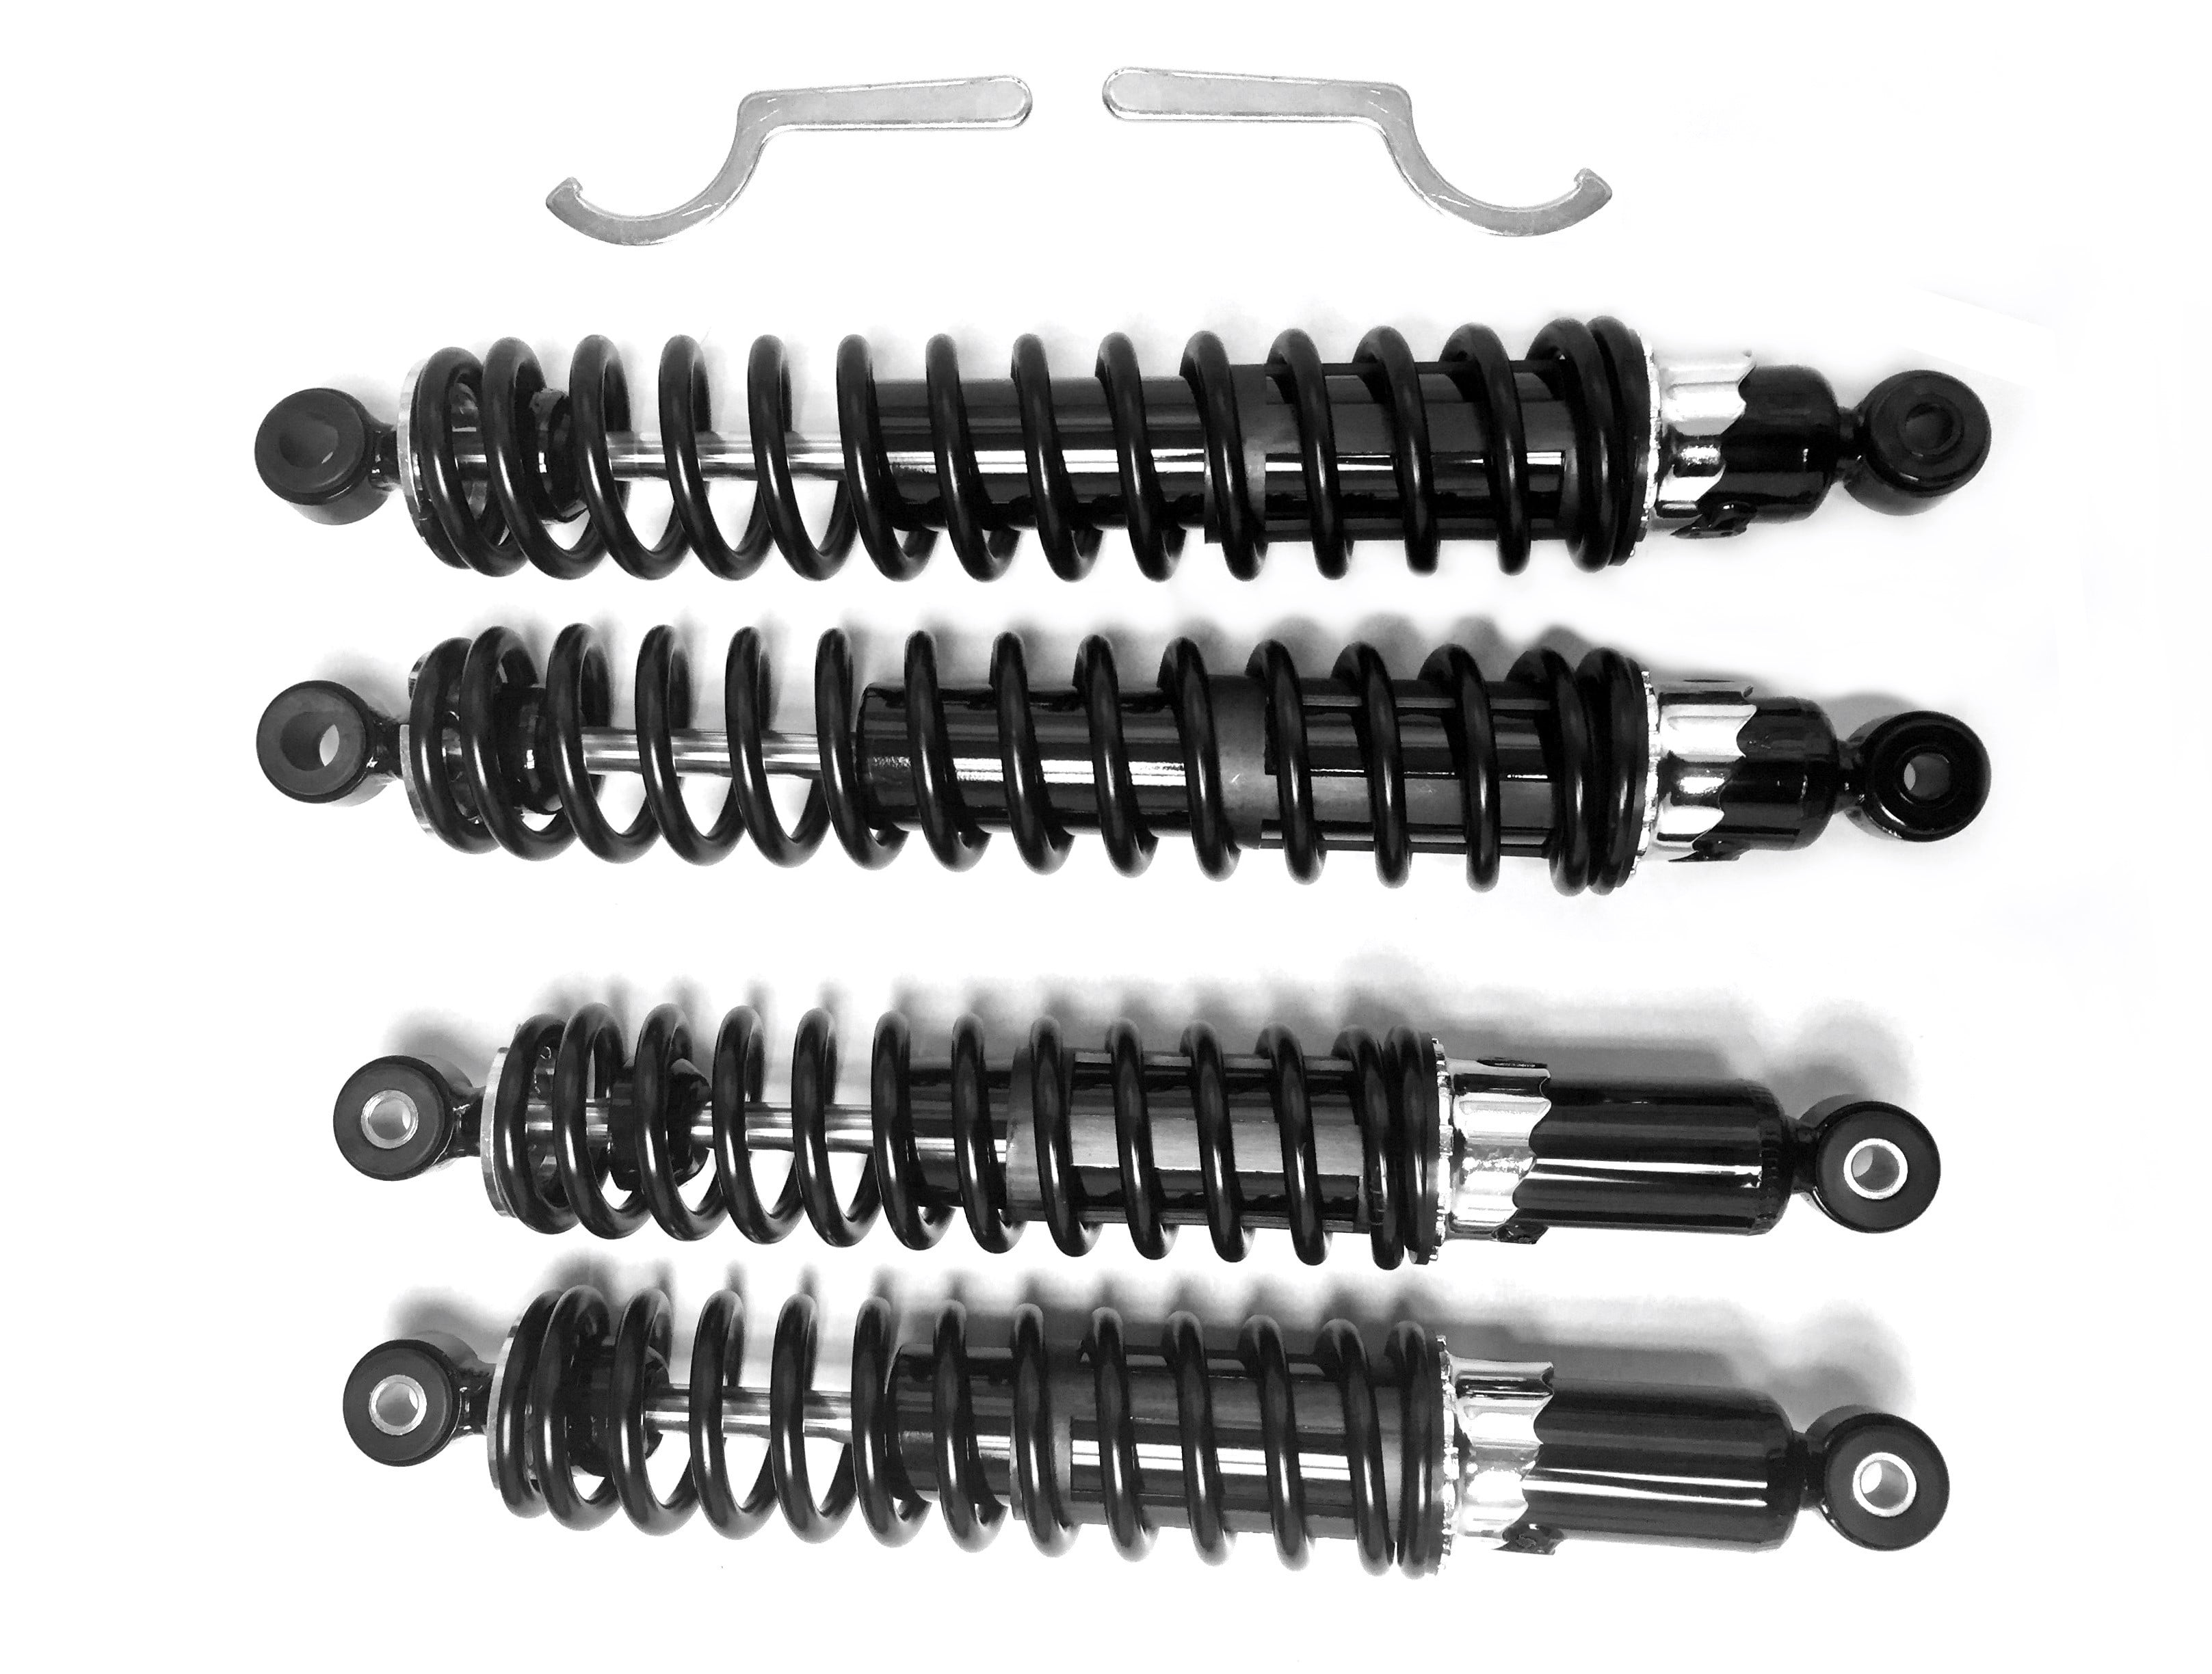 Shocks fit Honda Foreman 450 TRX450 E/ES 1998-2004 Front and Rear Gas 